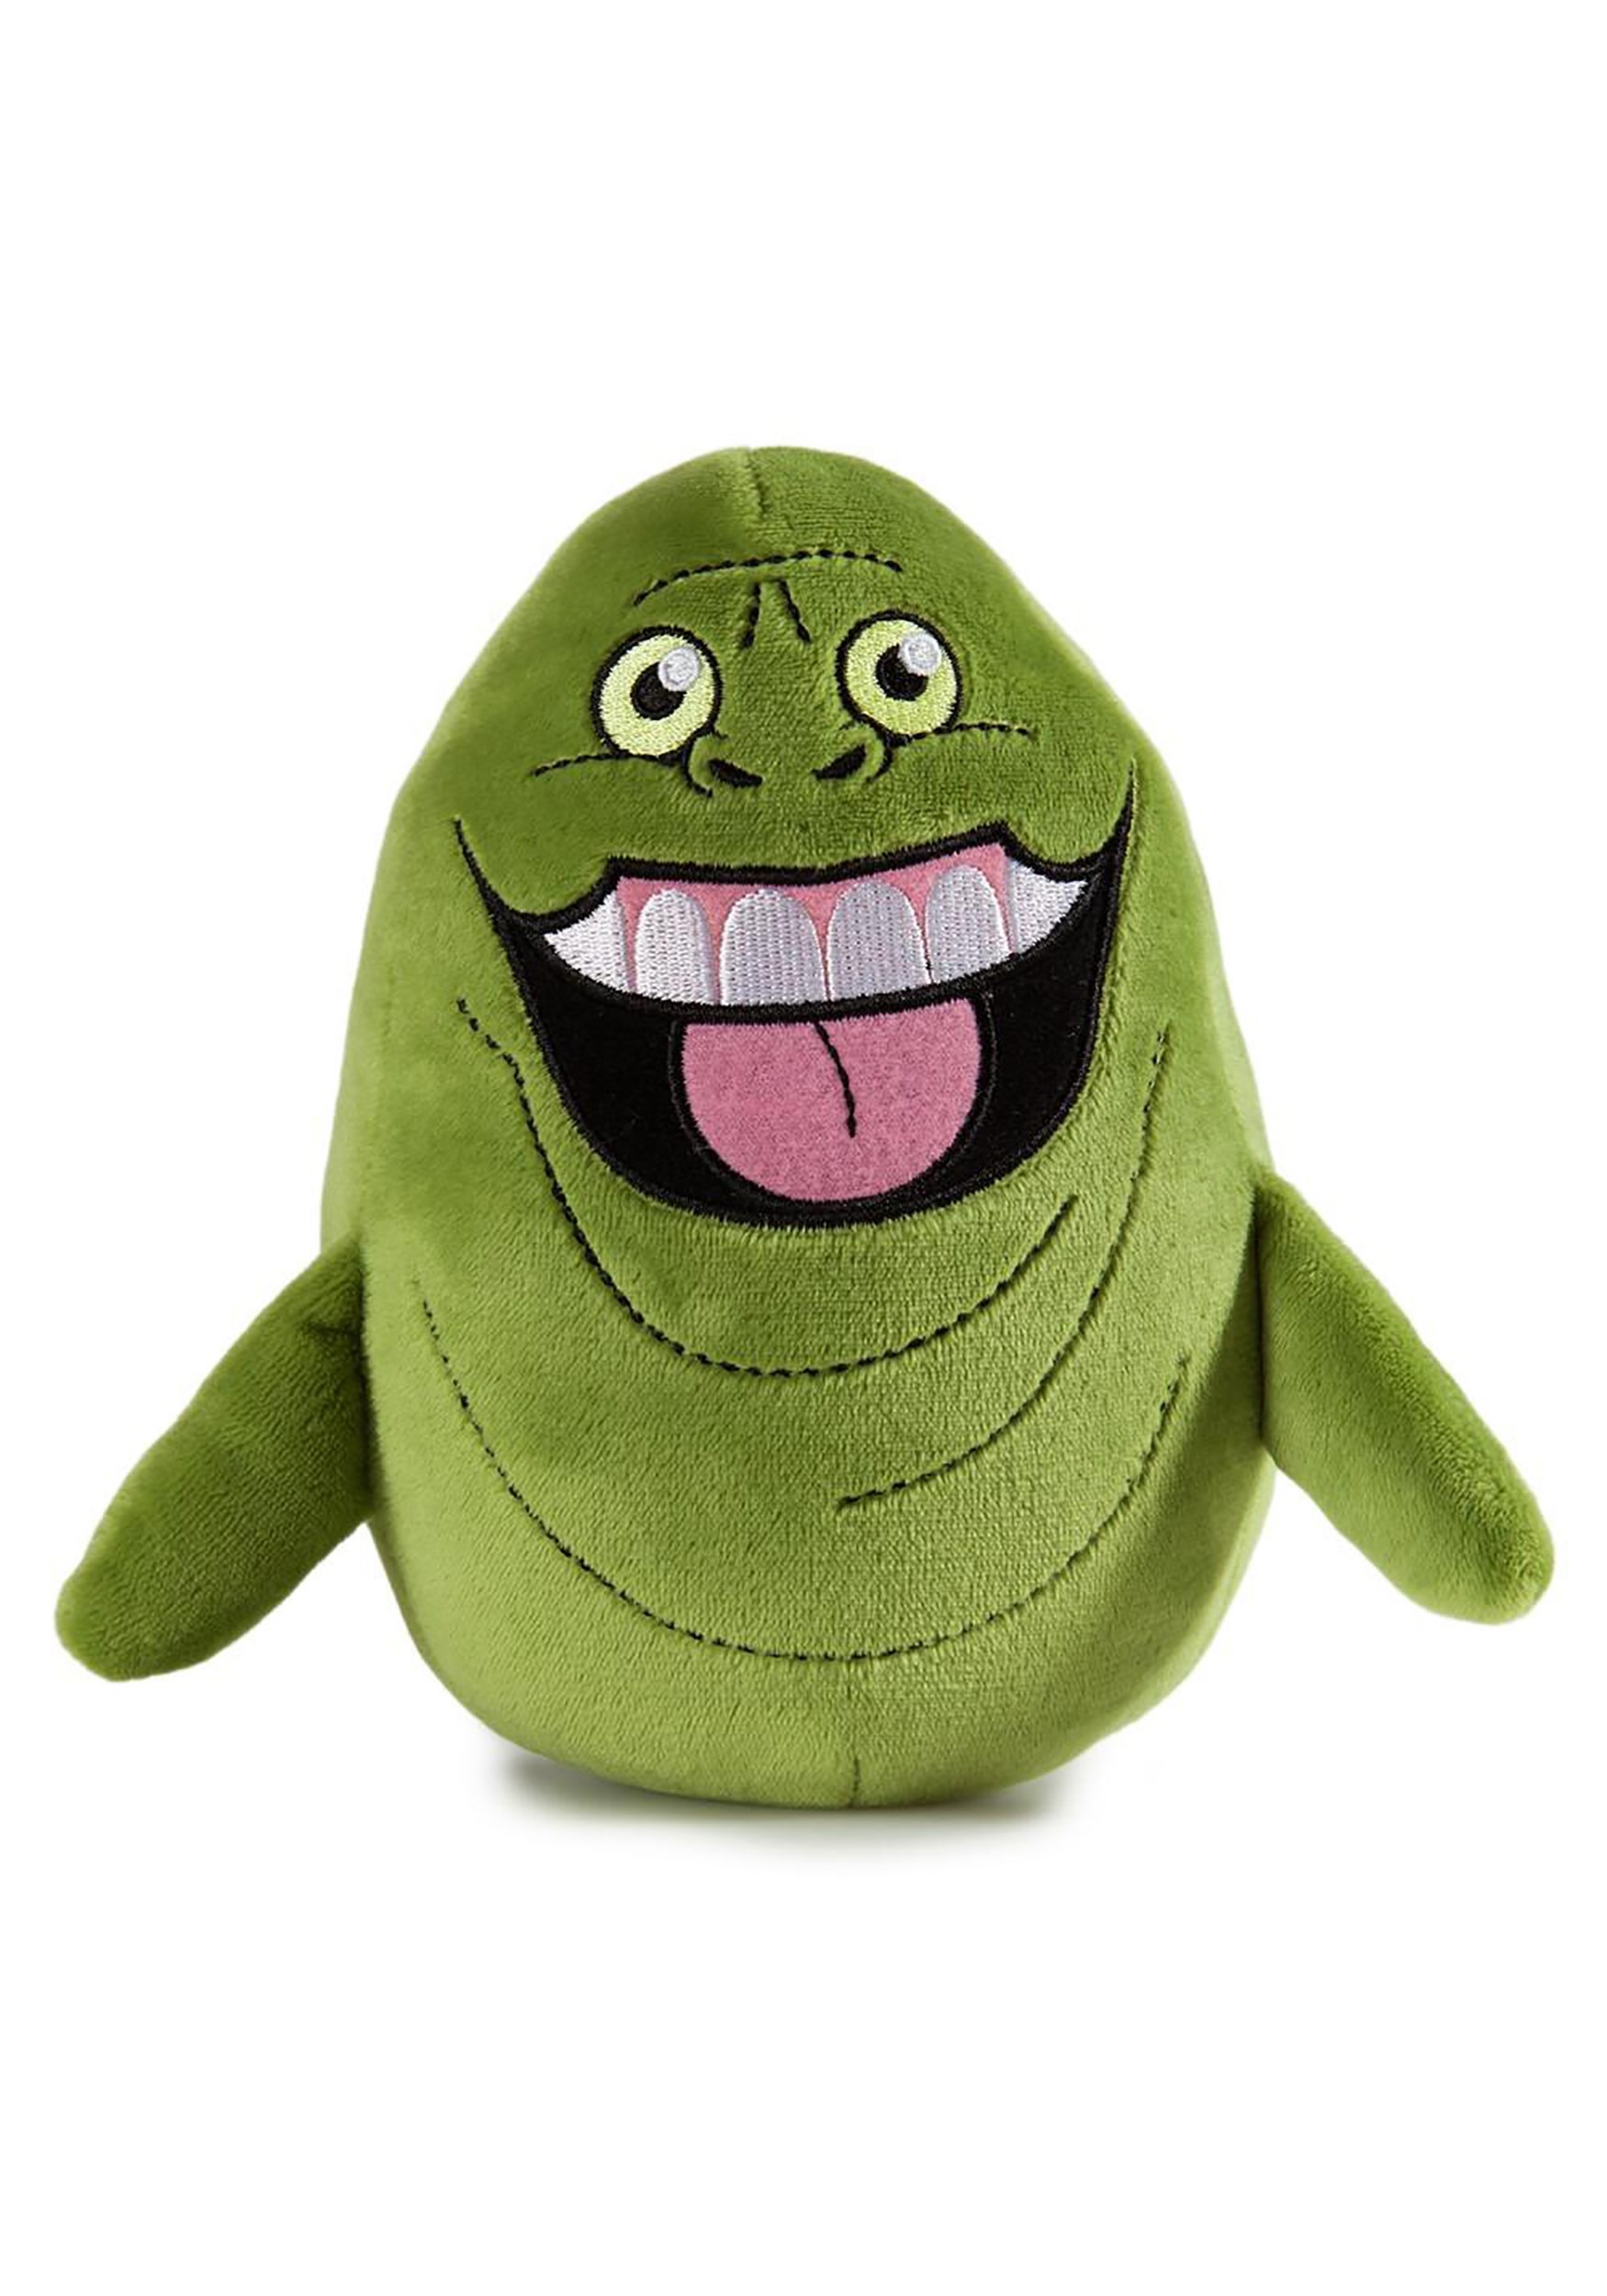 Horror Ghostbusters Plush Slimer Green Ghost Scary Stuffed Funny Toy Doll Gift 